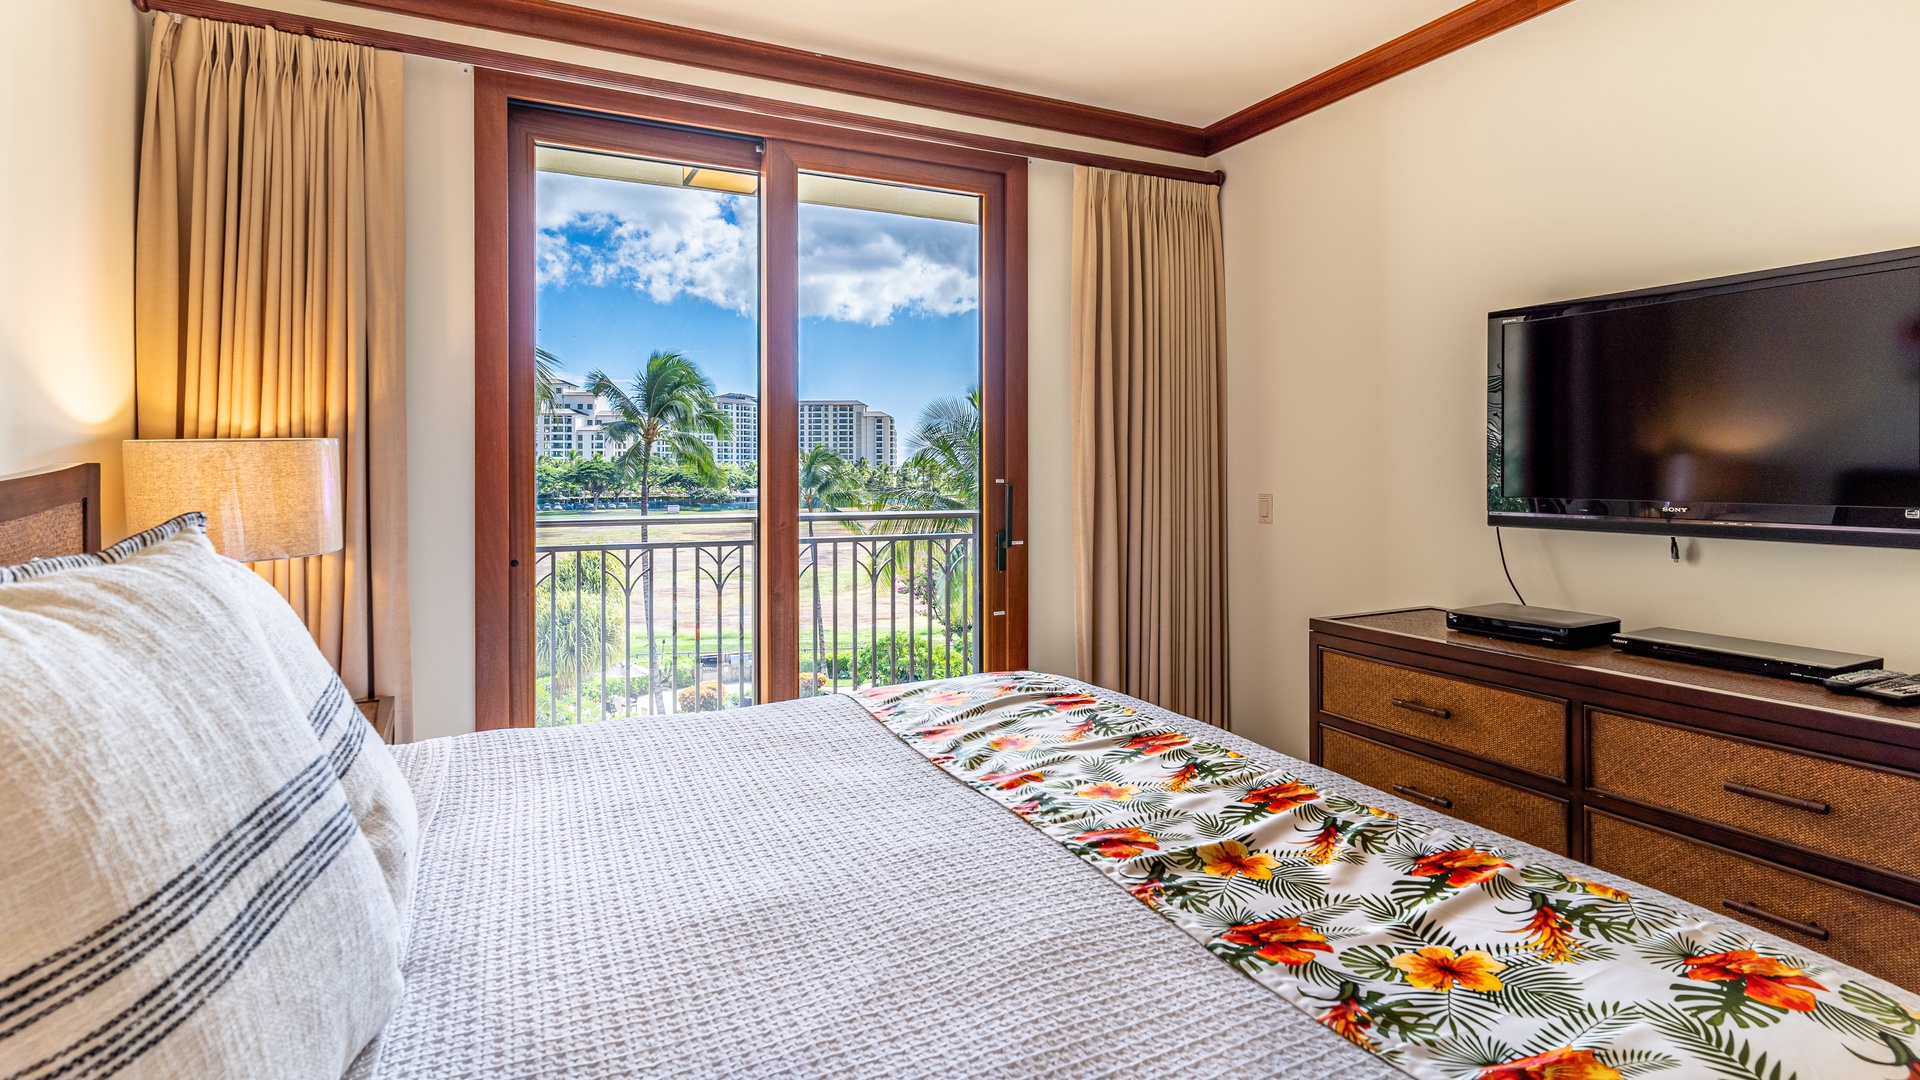 Kapolei Vacation Rentals, Ko Olina Beach Villas B403 - Rest and relax with views for days.